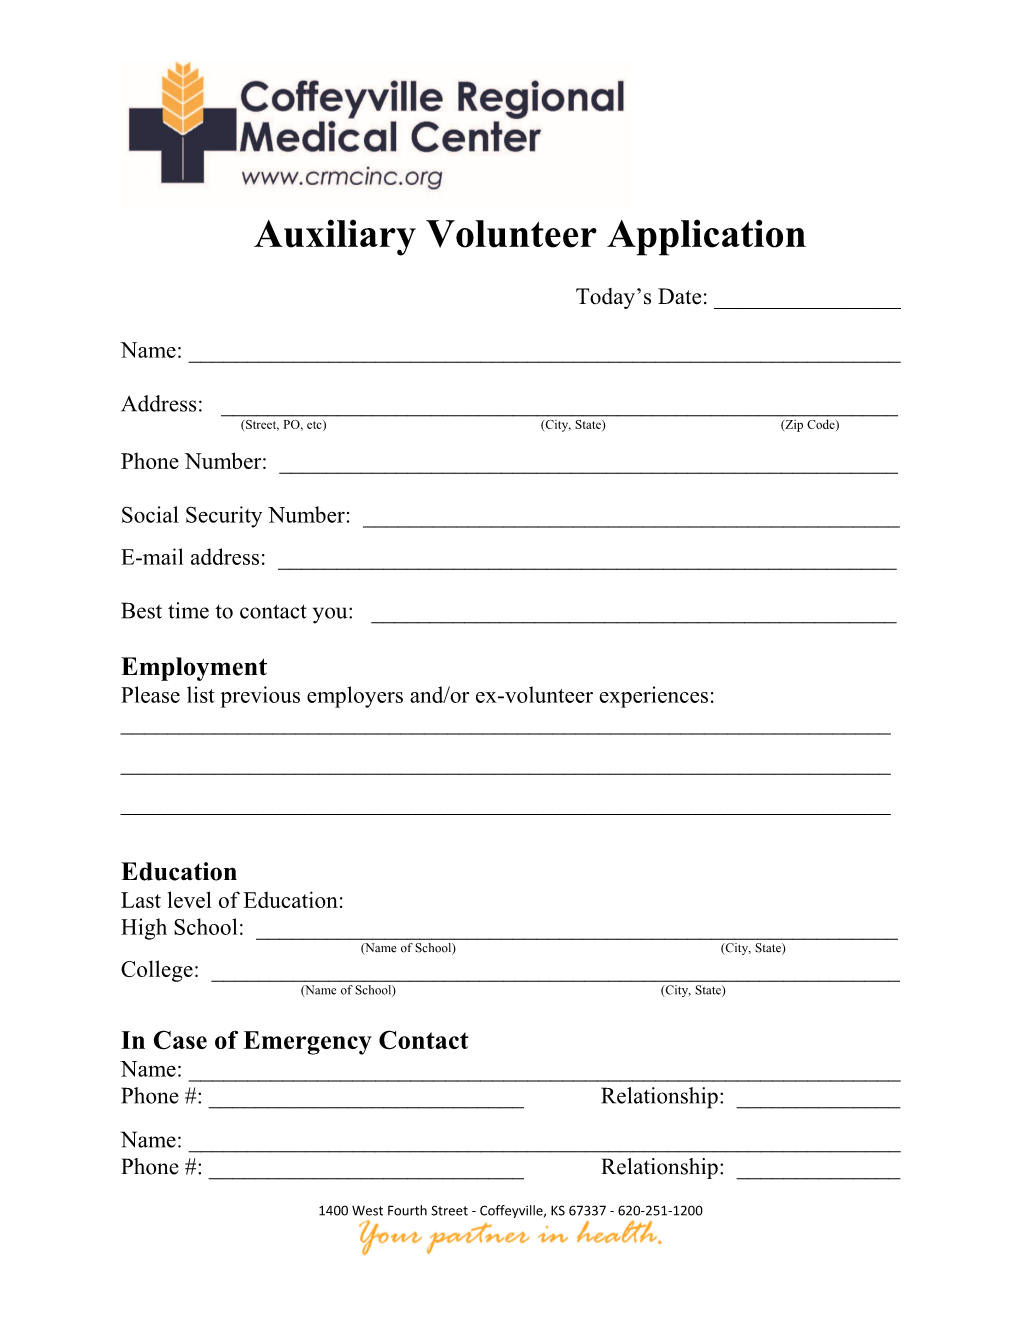 Auxiliary Volunteer Application